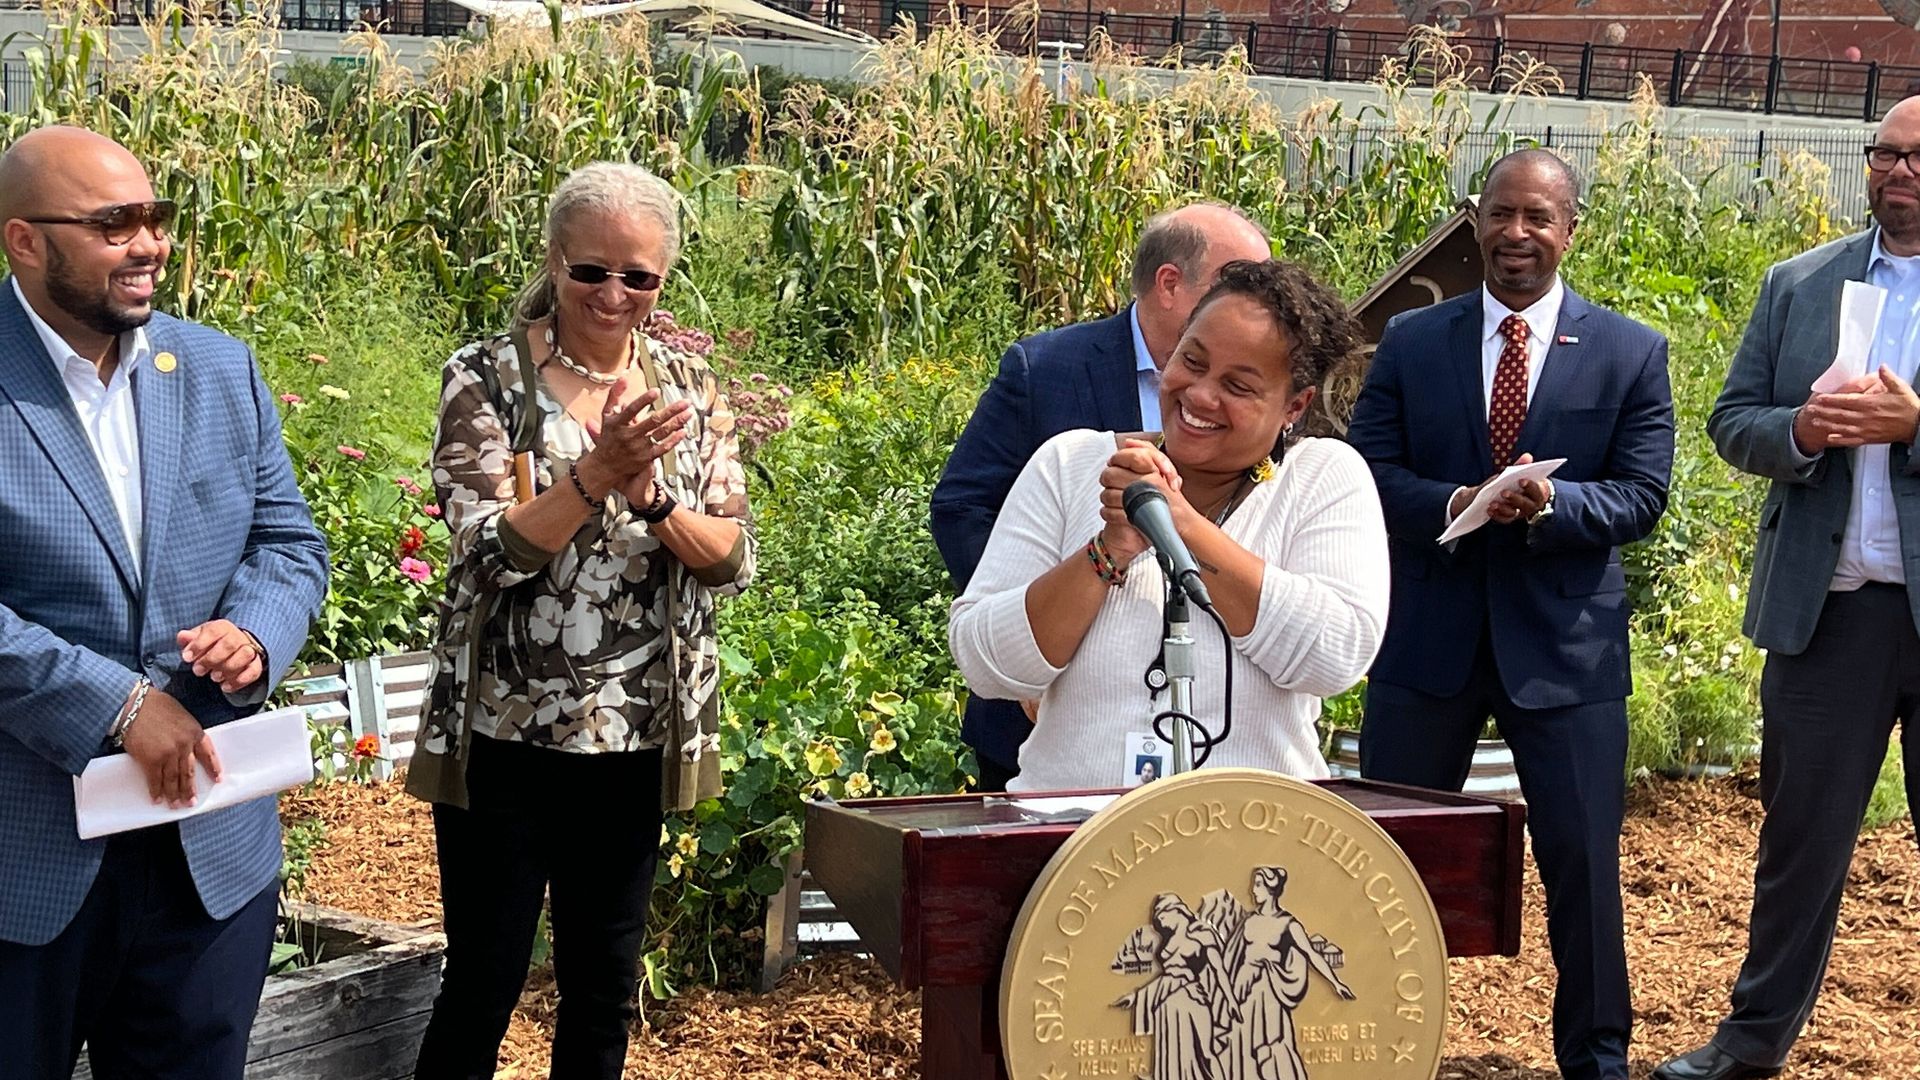 New director of agriculture Tepfirah Rushdan stands at a podium smiling in front of other officials and a garden, with brick buildings in the background.